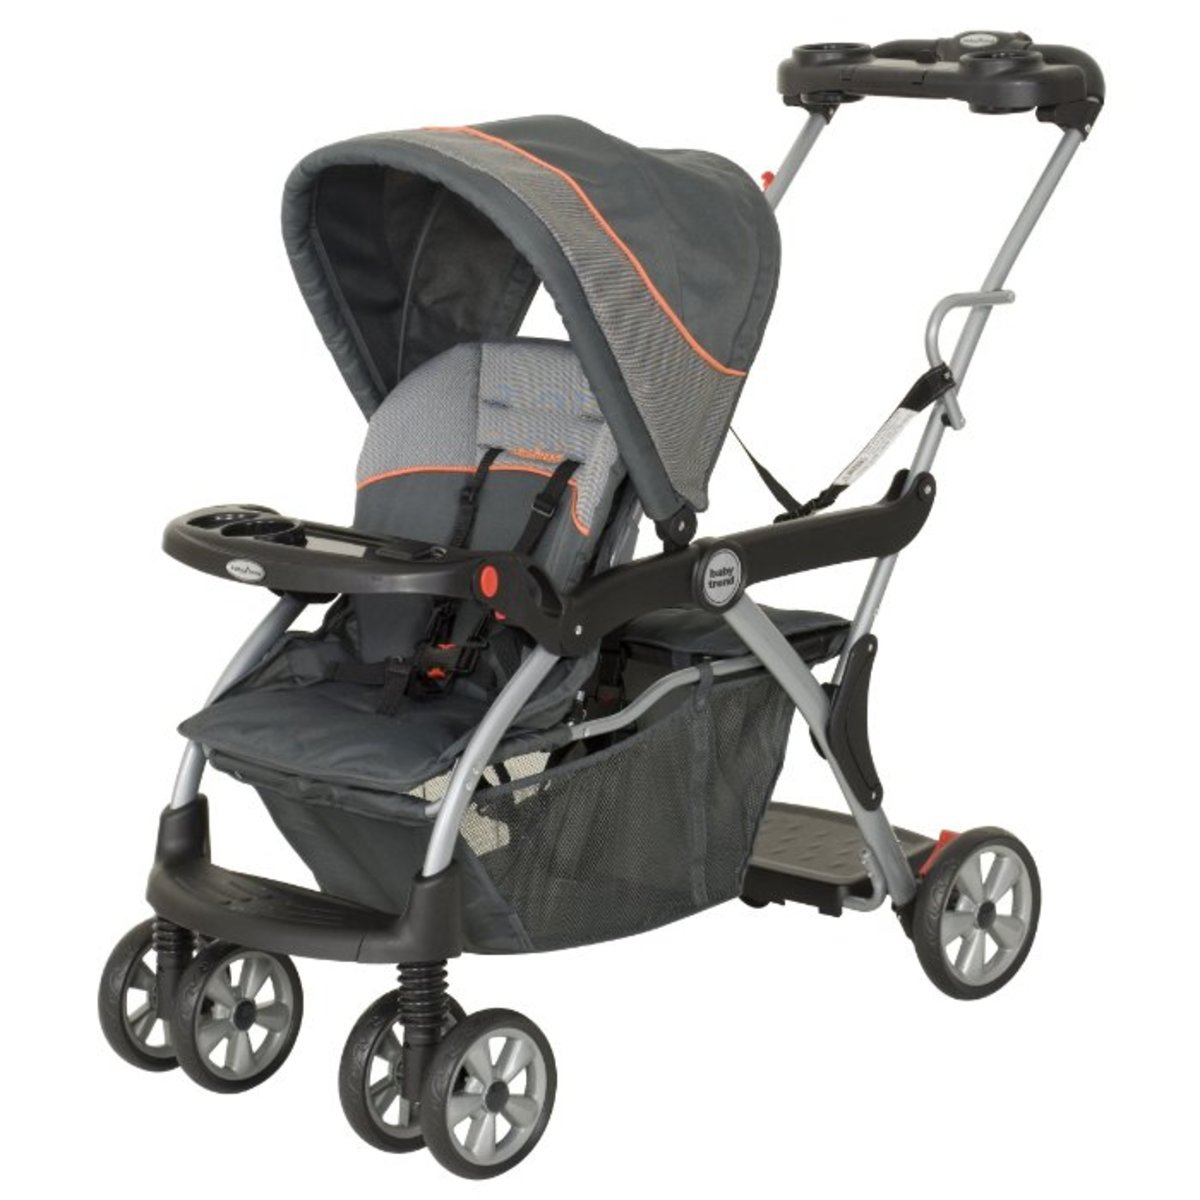 The Best Sit and Stand Strollers | HubPages